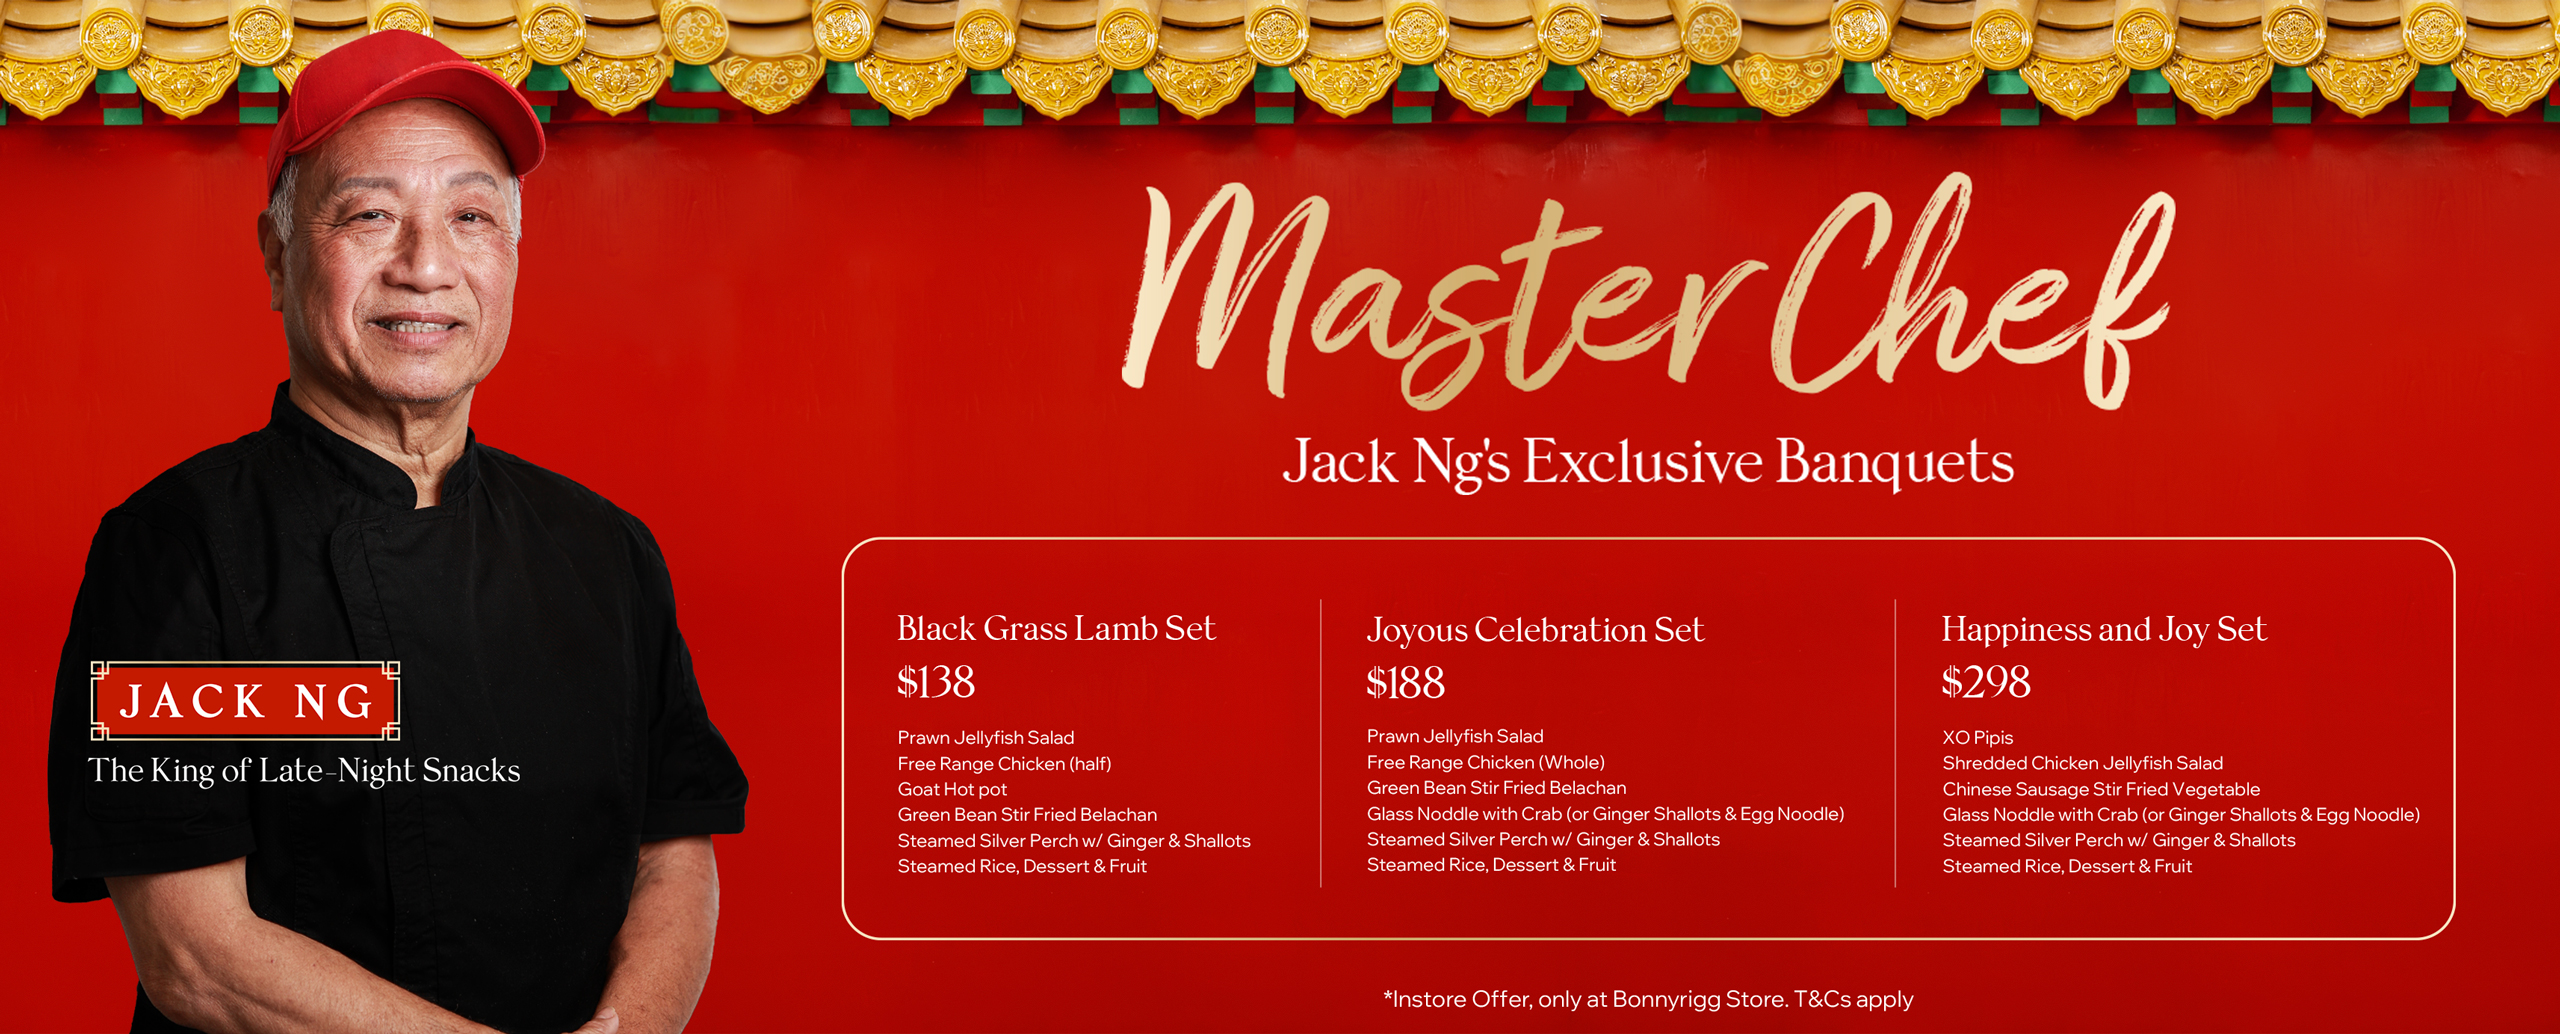 Iron Chef Chinese Seafood Restaurant Master Chef Jack Ng's Exclusive Banquets